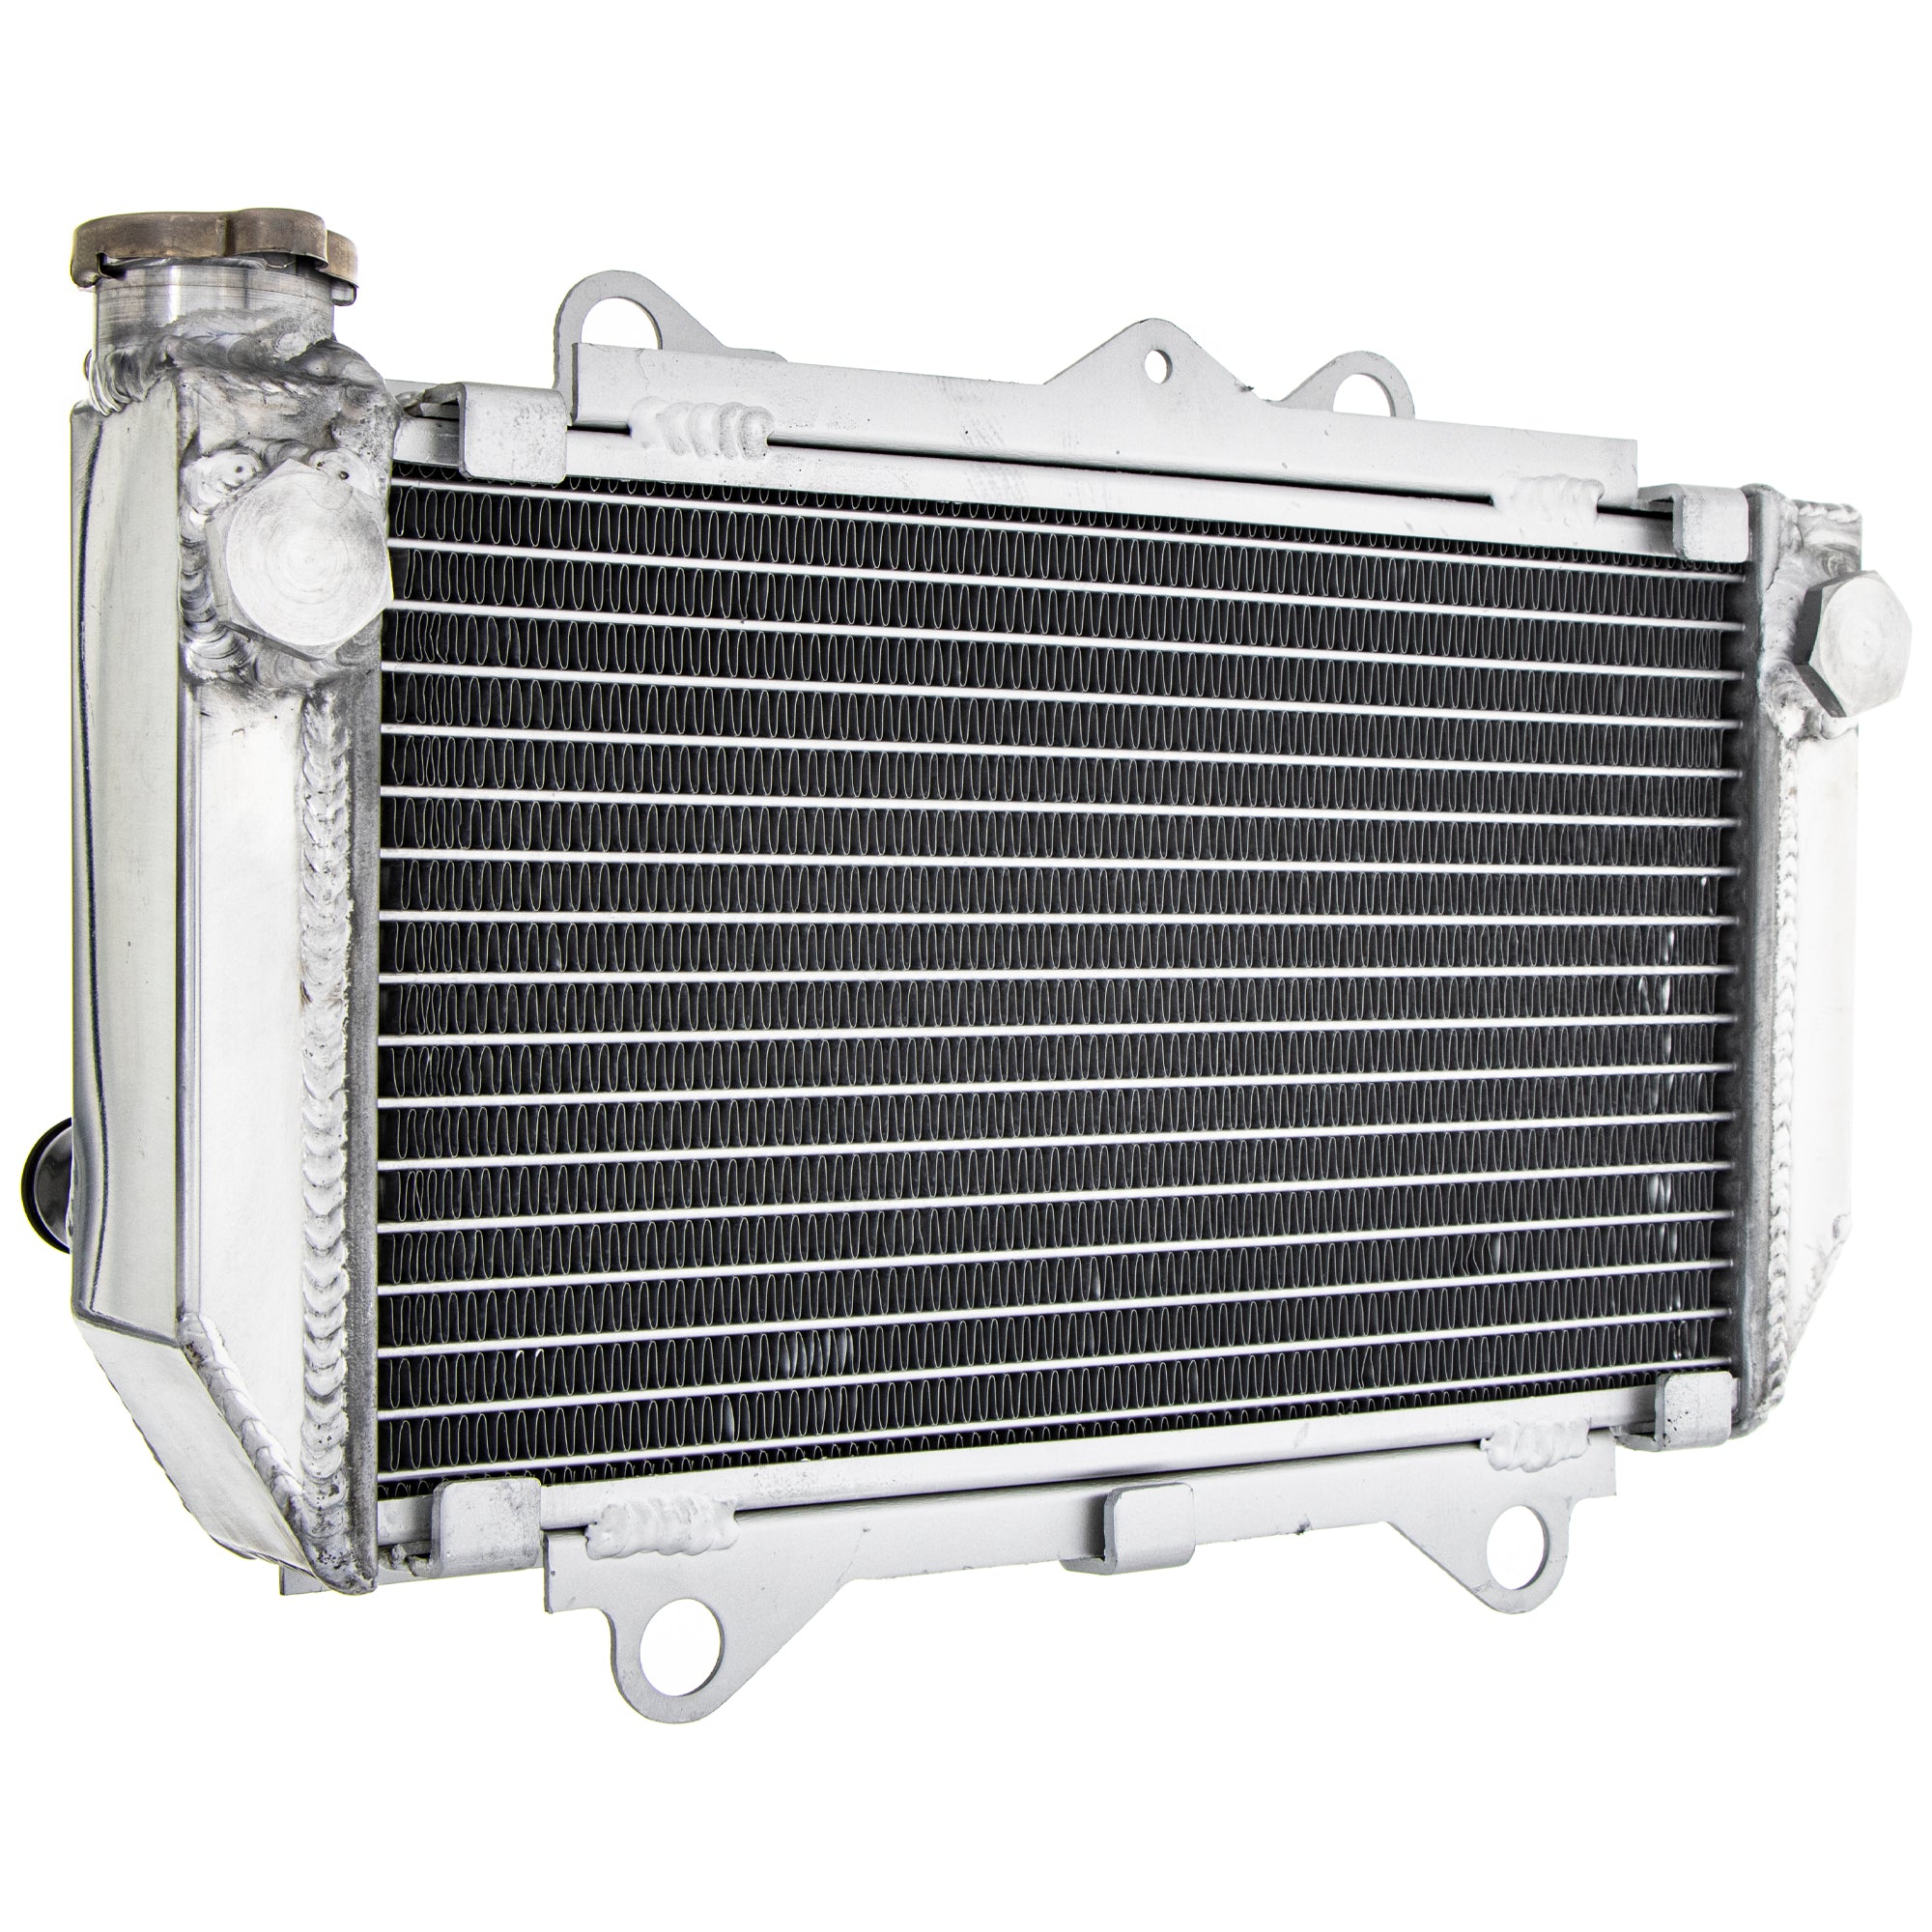 NICHE 519-CRD2245A High Capacity Radiator for zOTHER YFZ450V